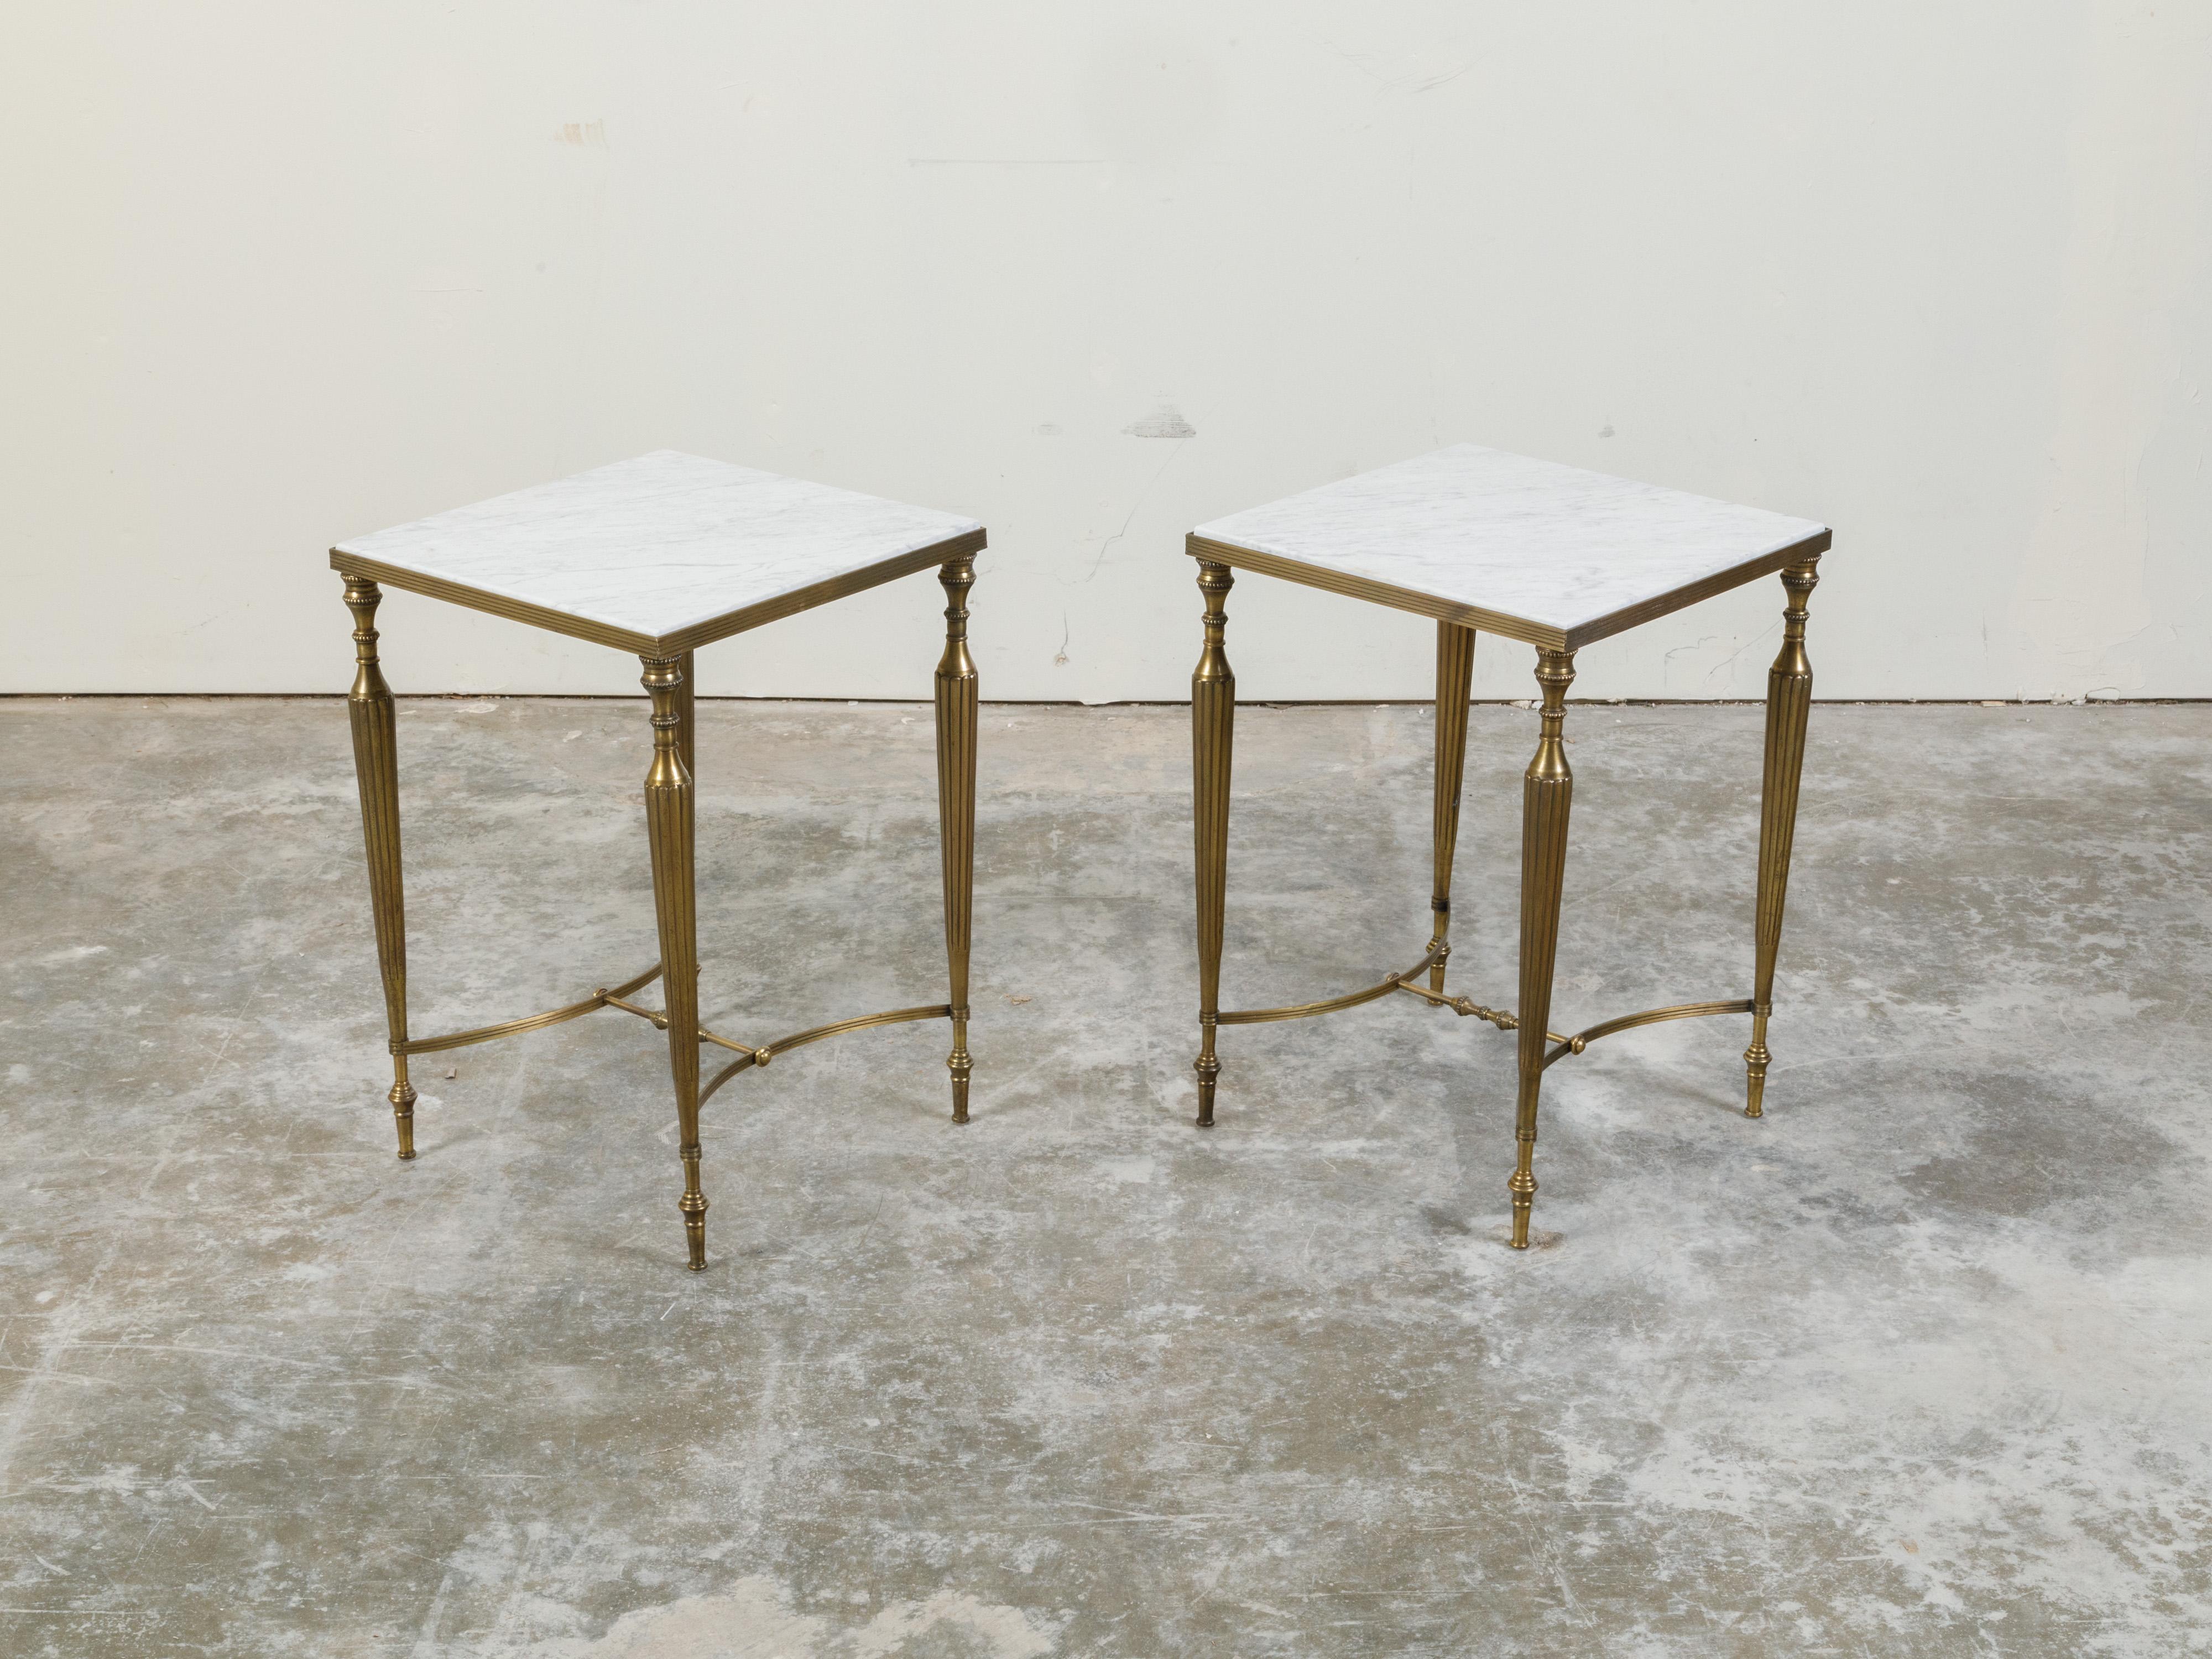 European Pair of Midcentury Brass Side Tables with White Marble Tops and Reeded Legs